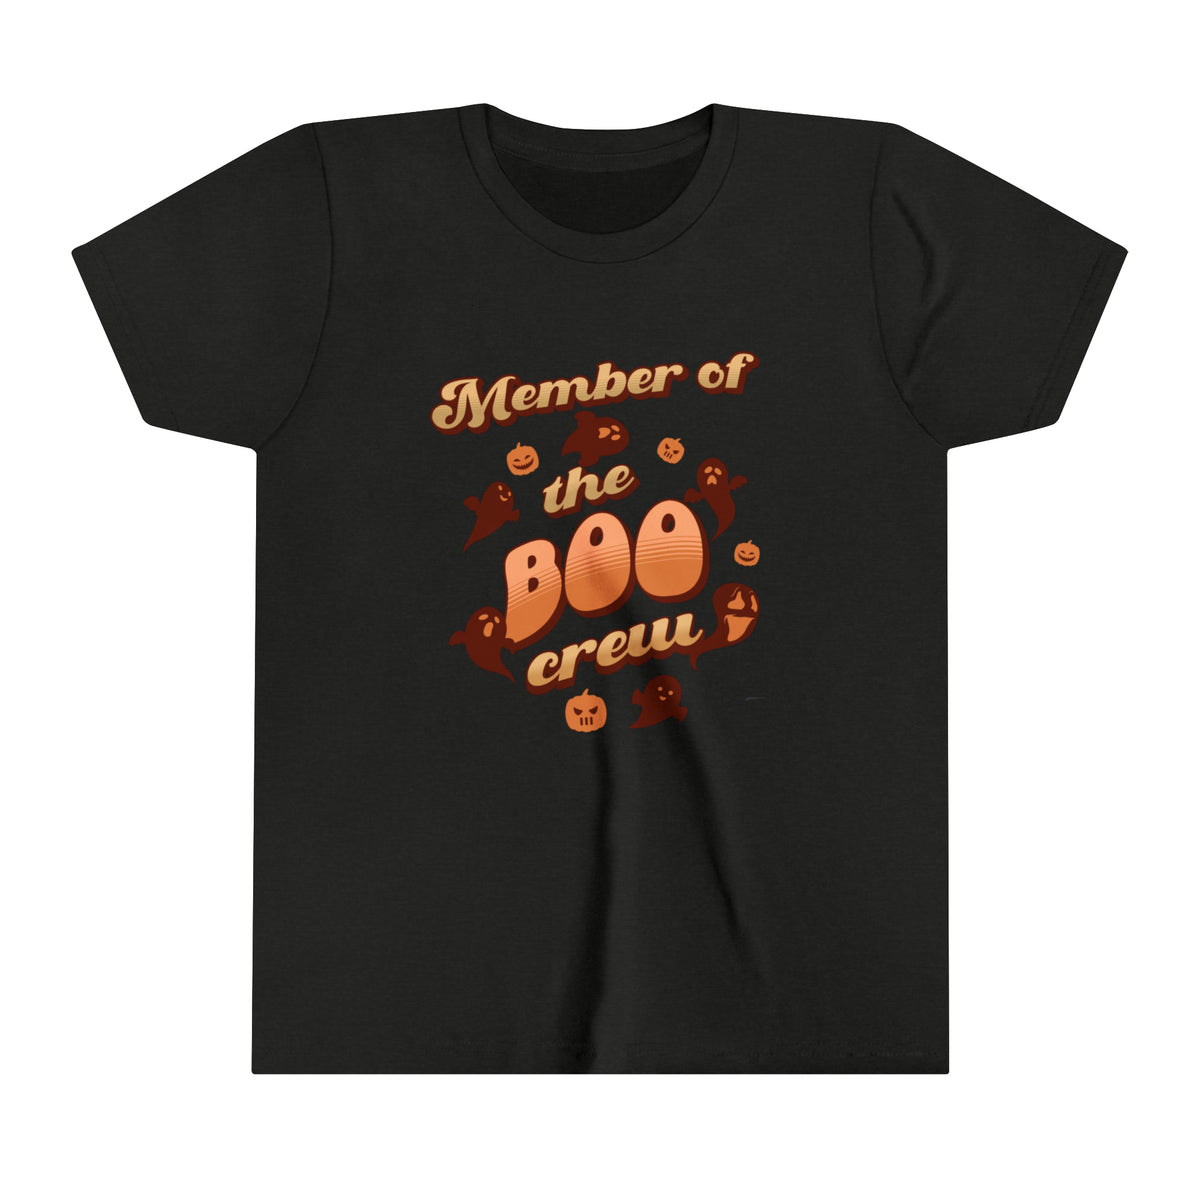 Halloween Funny T-shirts For Kids - Member of the Boo Crew (Black Heather)